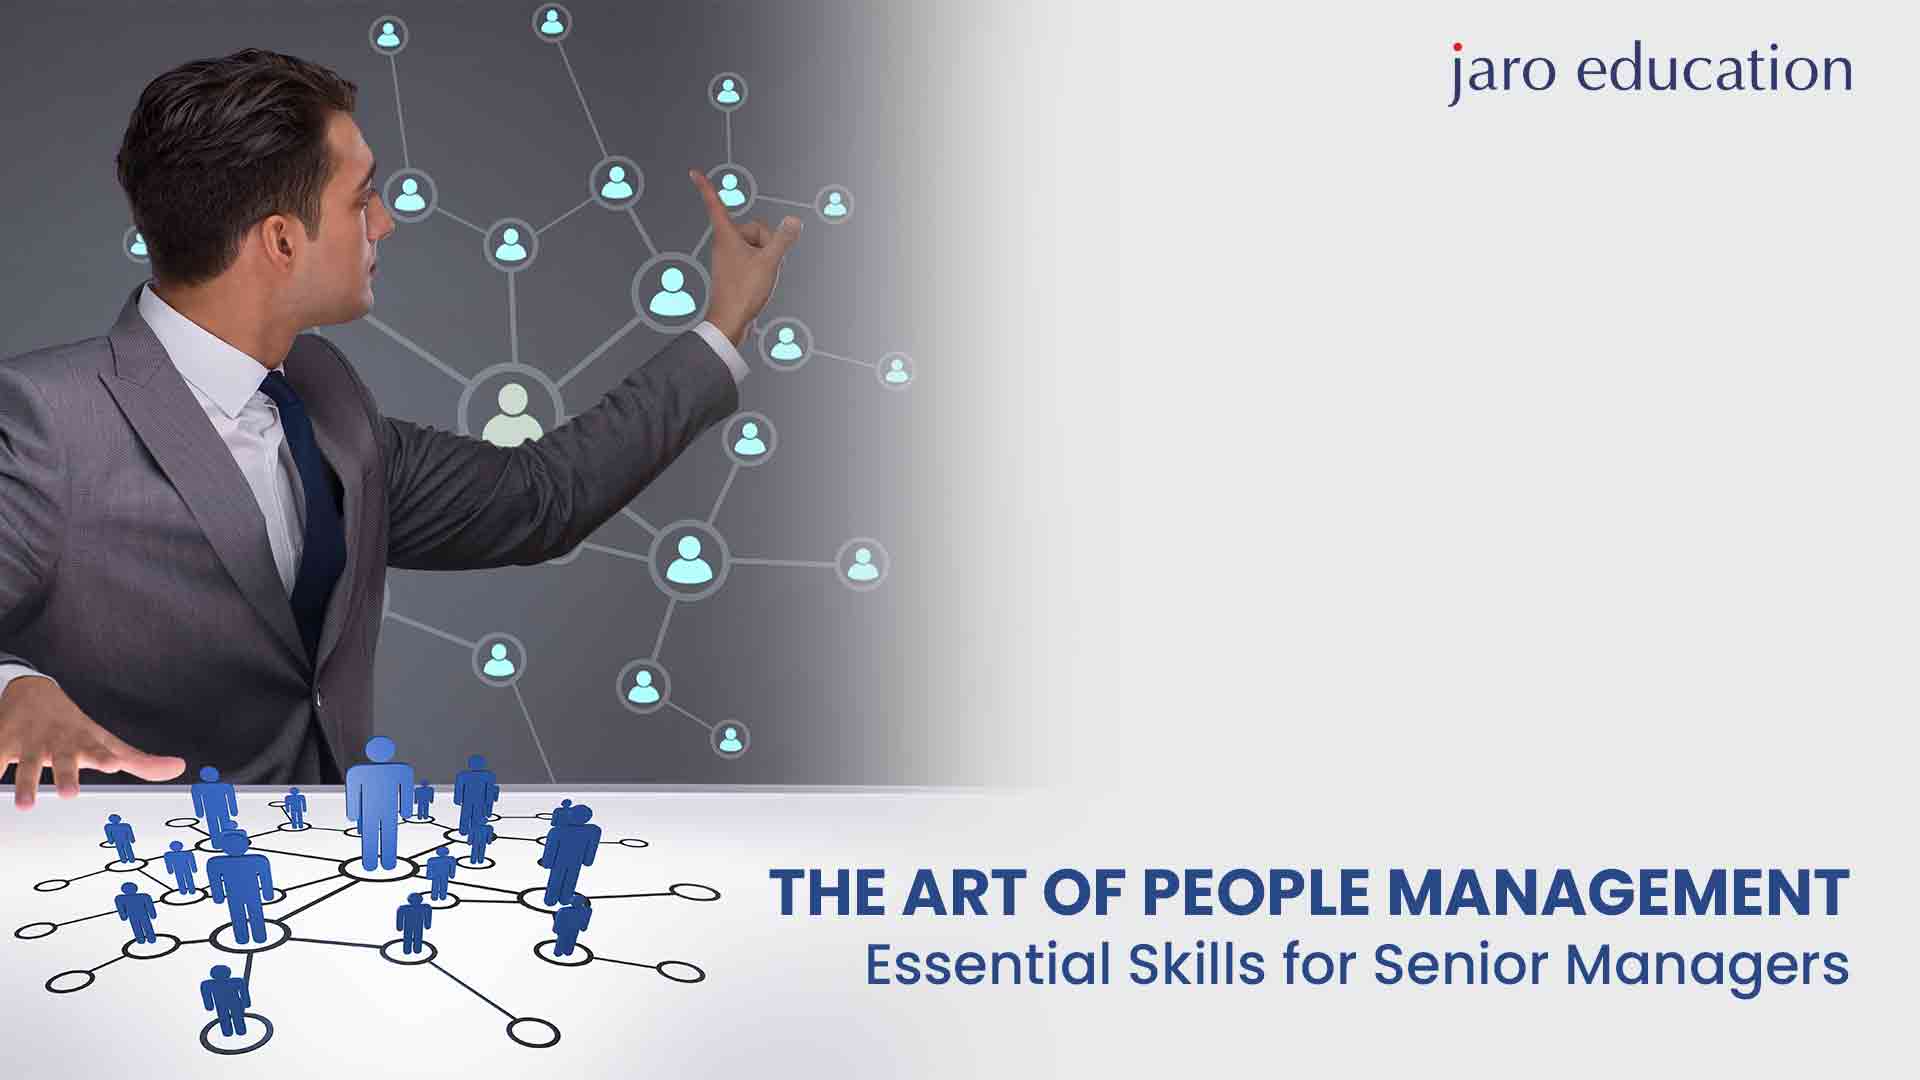 The Art of People Management Essential Skills for Senior Managers